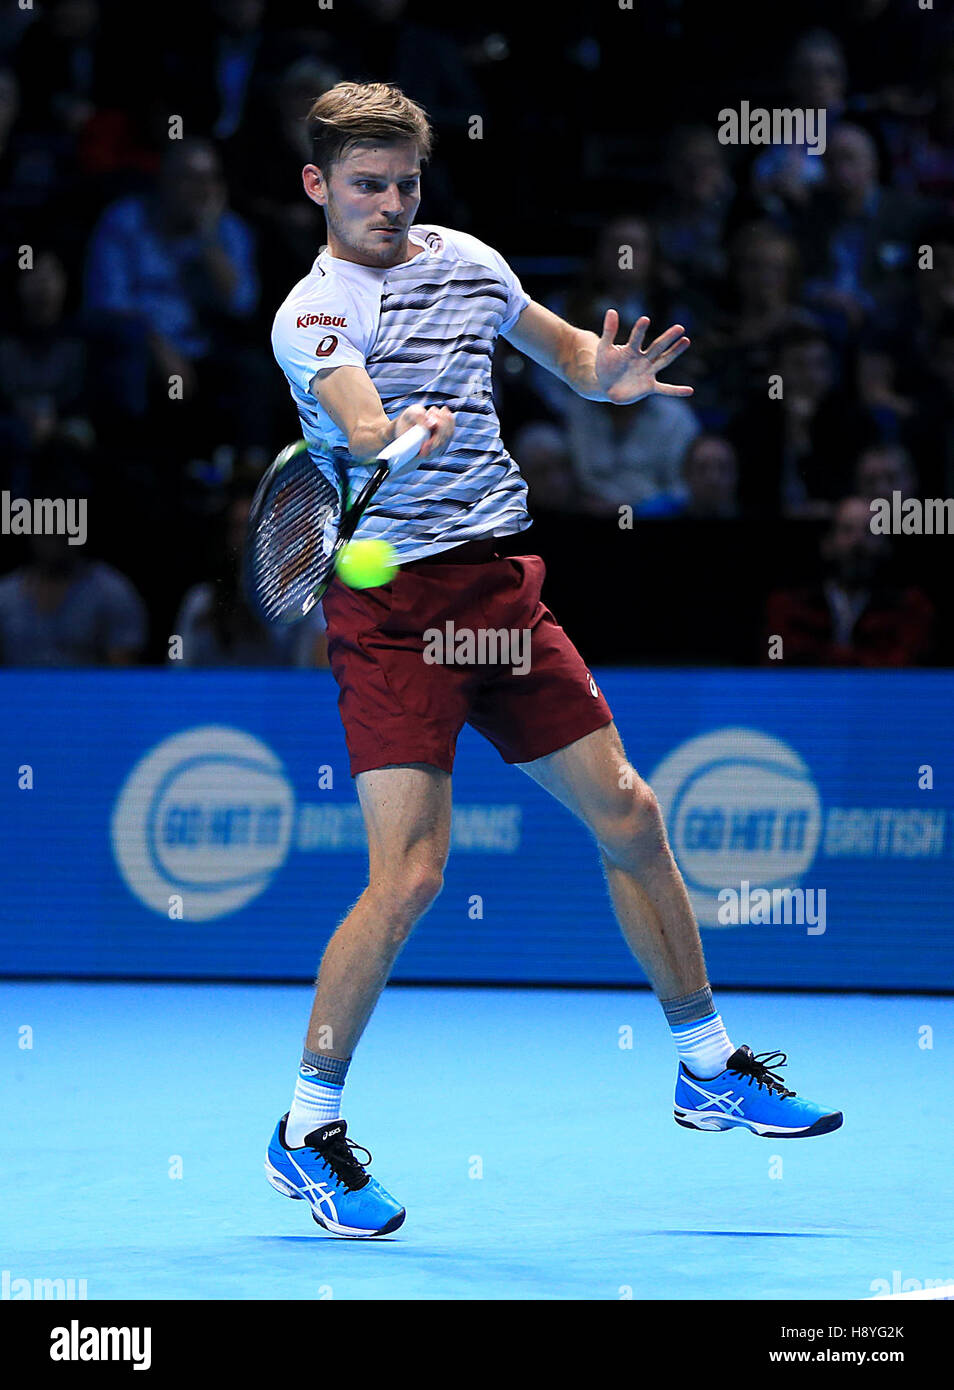 David Goffin in action against Novak Djokovic during day five of the Barclays ATP World Tour Finals at The O2, London. PRESS ASSOCIATION Photo. Picture date: Thursday November 17, 2016. See PA story TENNIS London. Photo credit should read: Jonathan Brady/PA Wire. Stock Photo